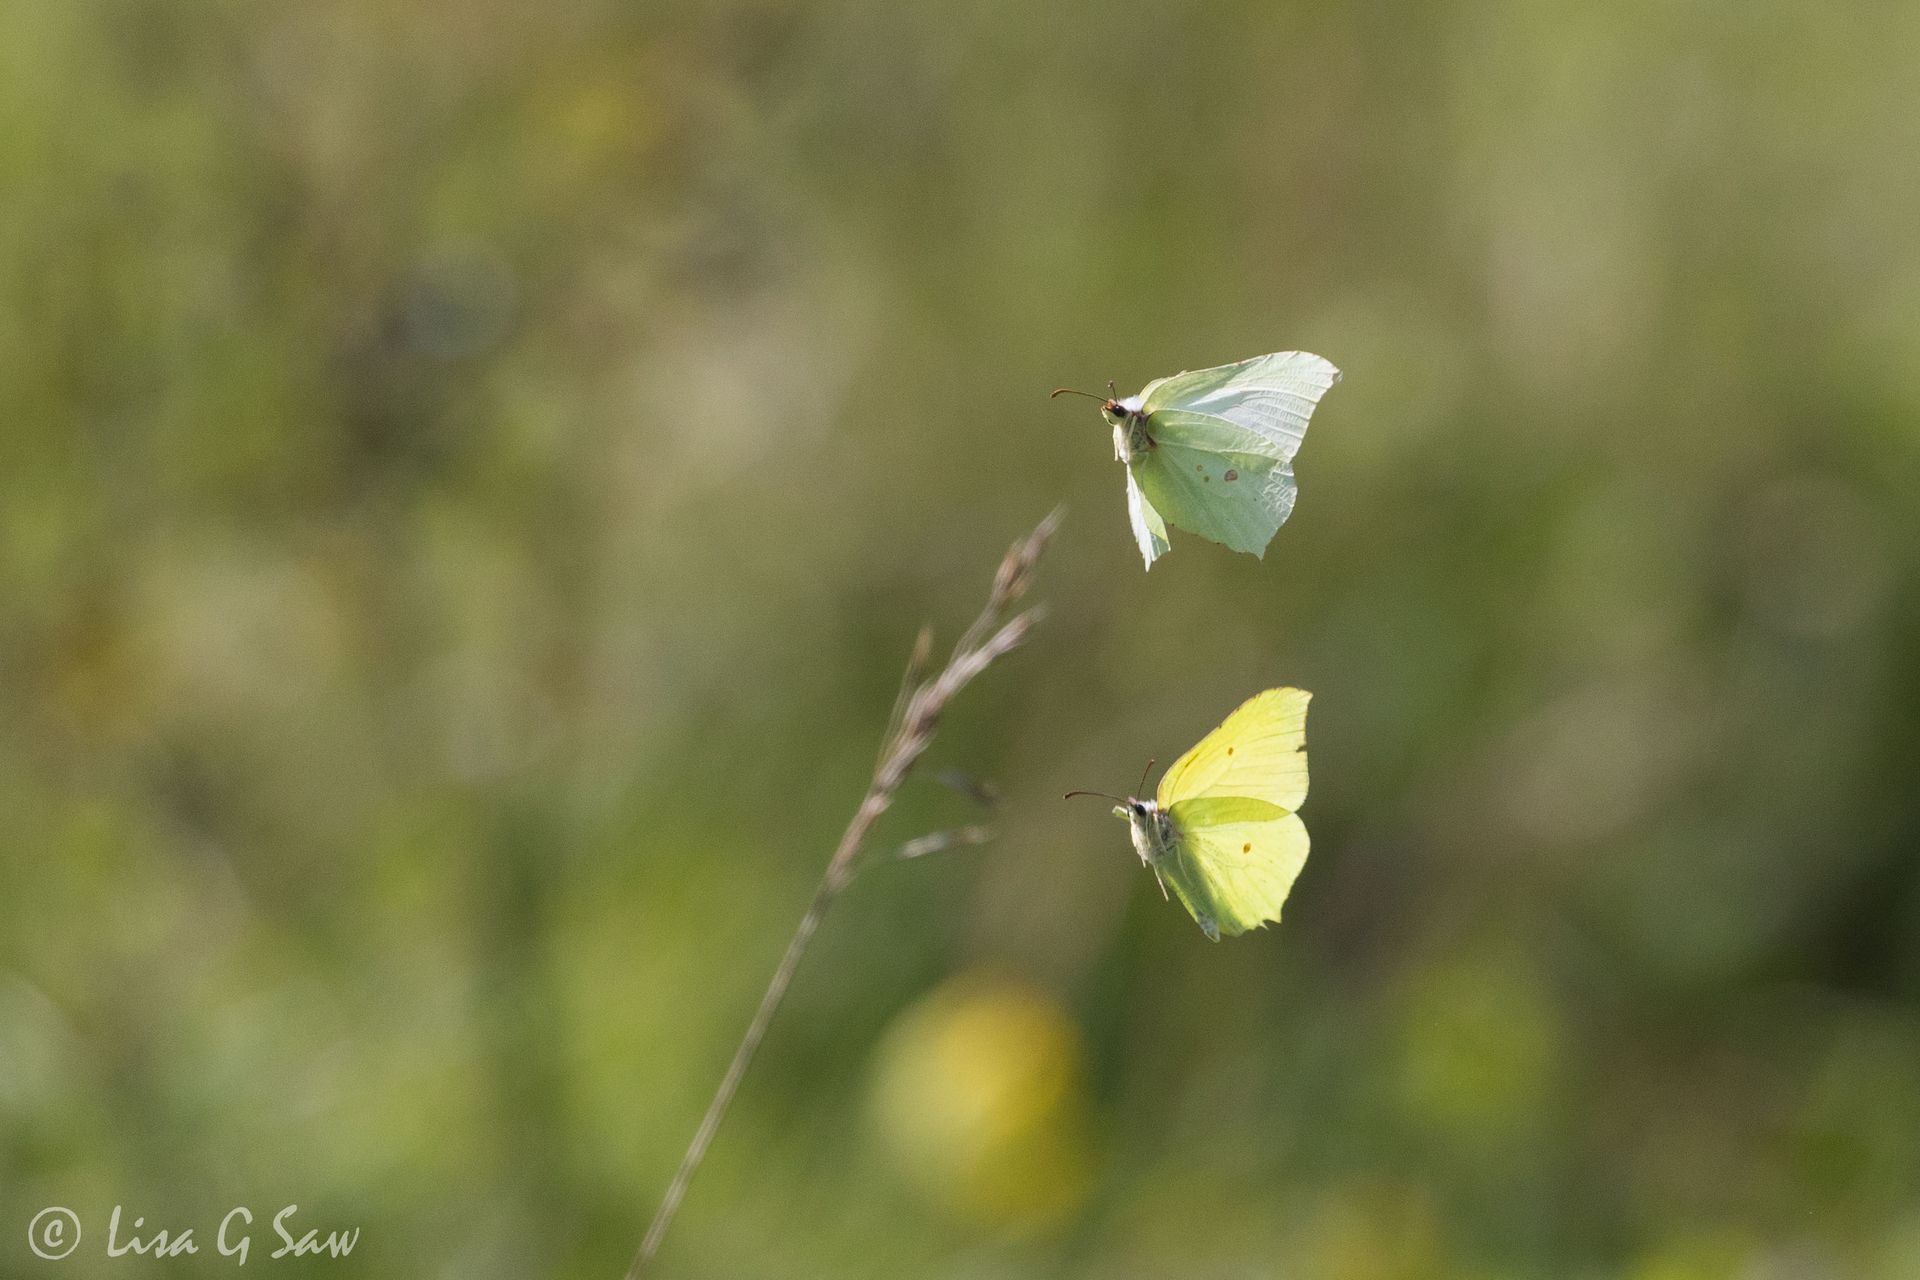 Male and female Brimstone butterflies flying